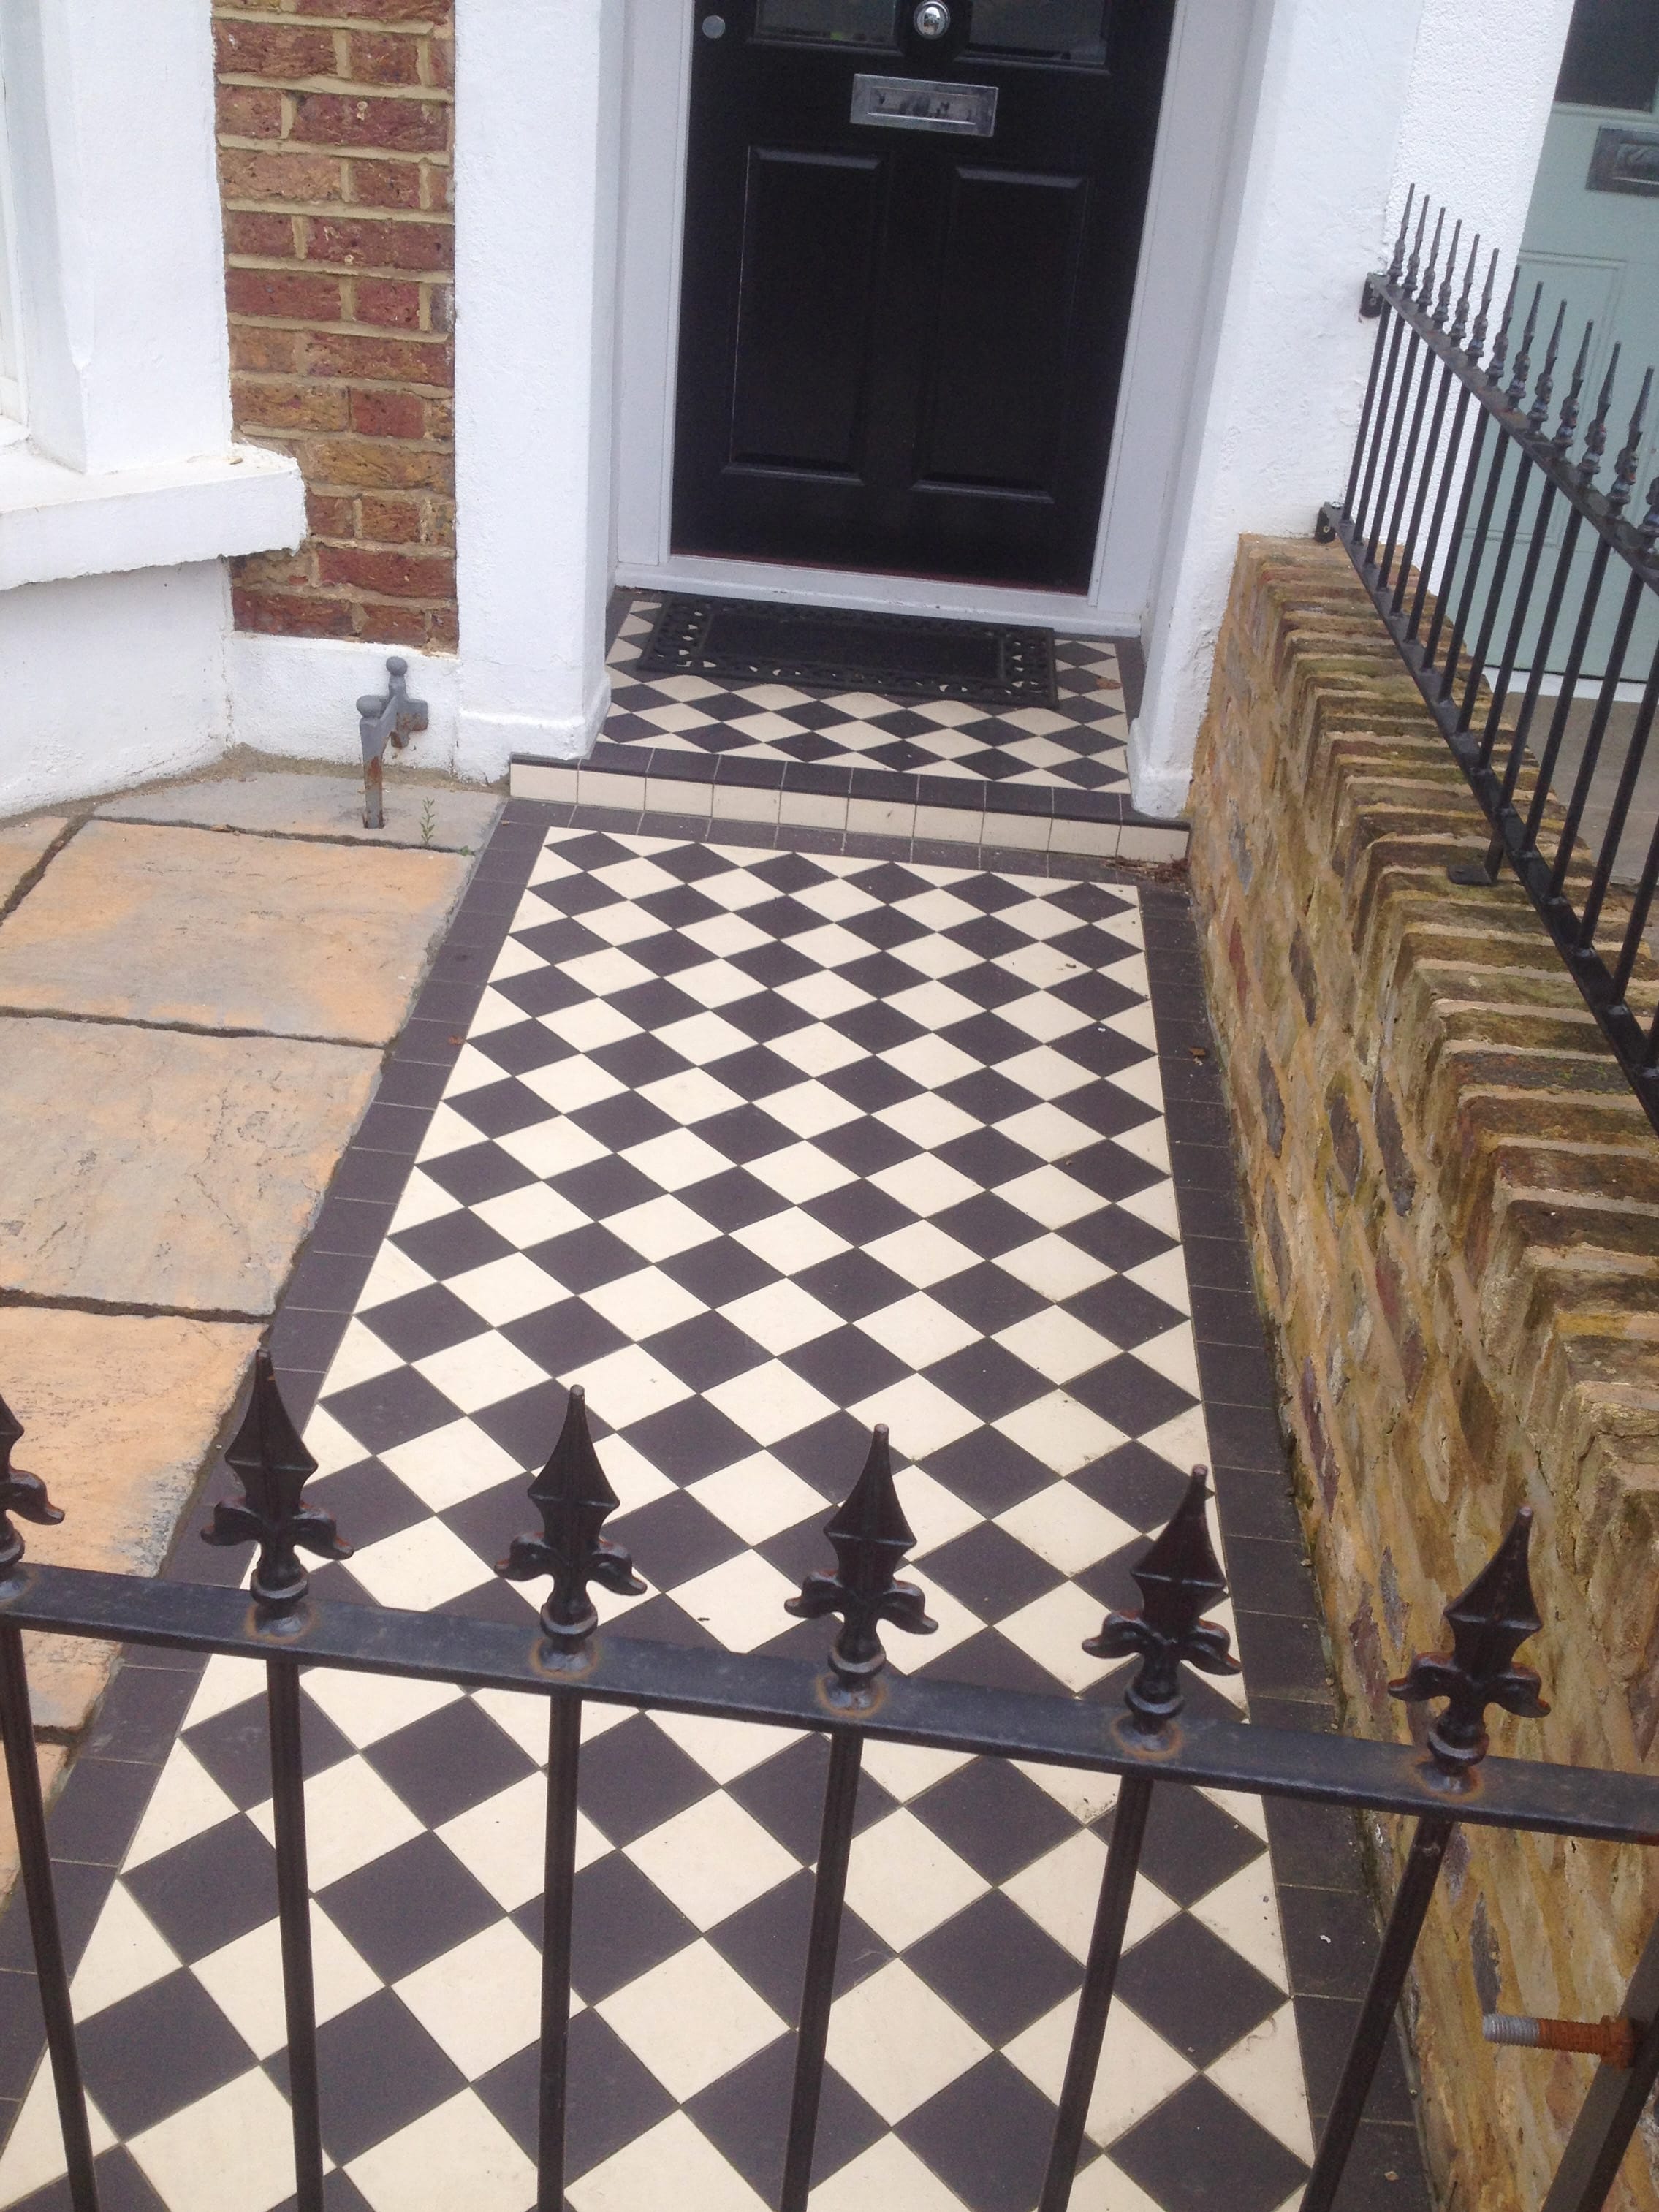 Victorian Geometric Floor Tiles - Outside Inspiration In South London